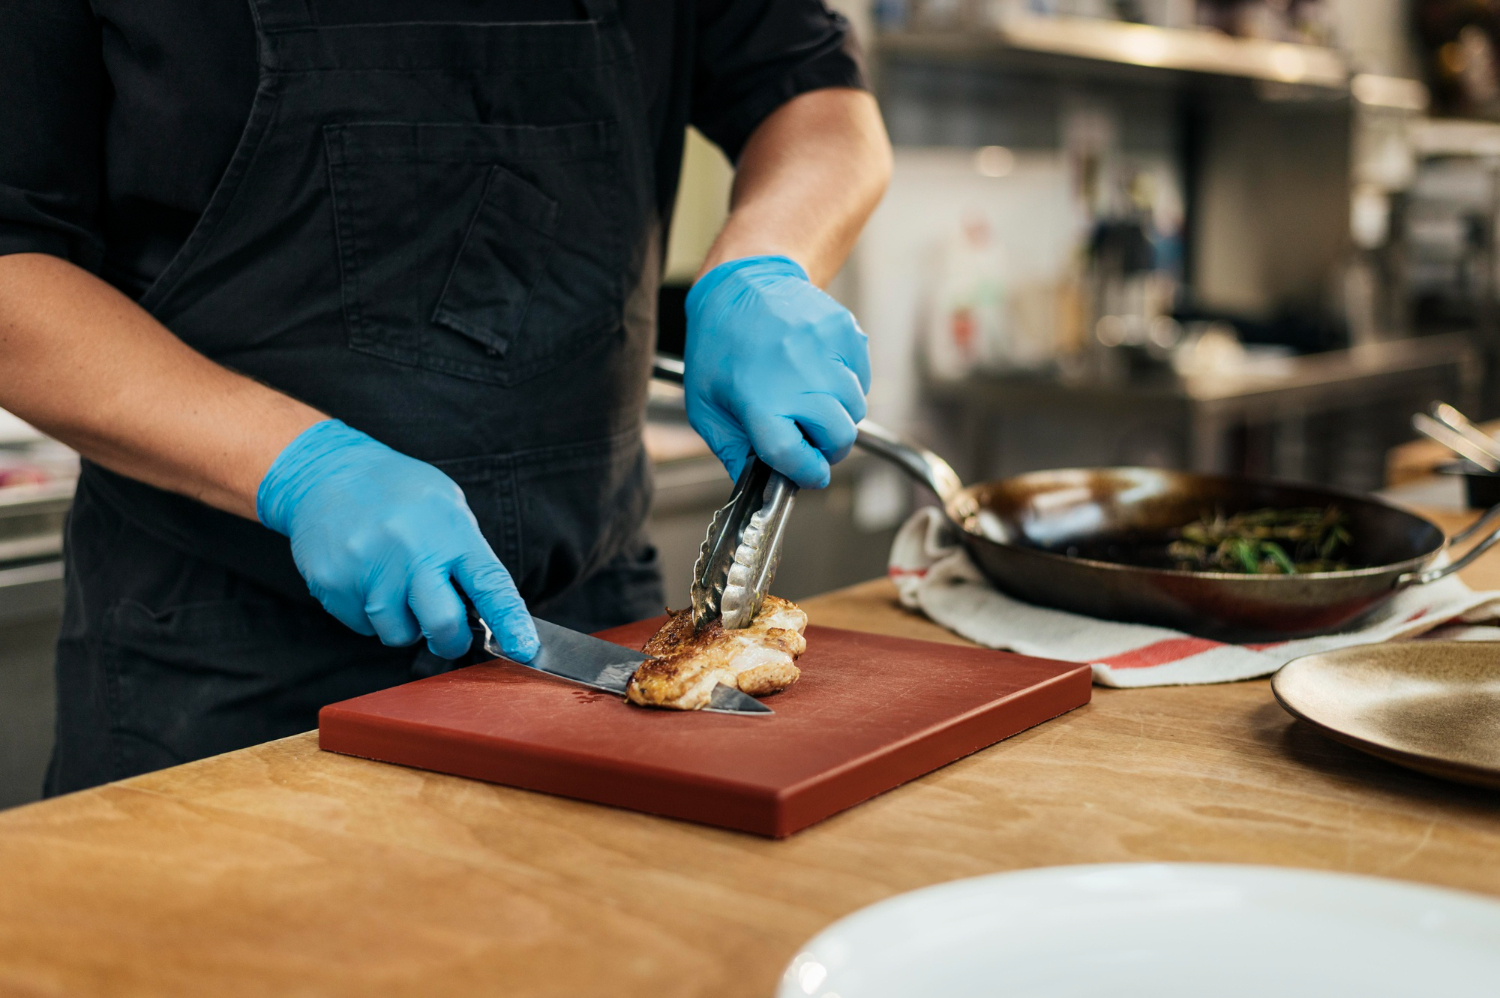 A male chef wears blue food-safe gloves and cuts a piece of cooked chicken on a cutting board in a restaurant kitchen.